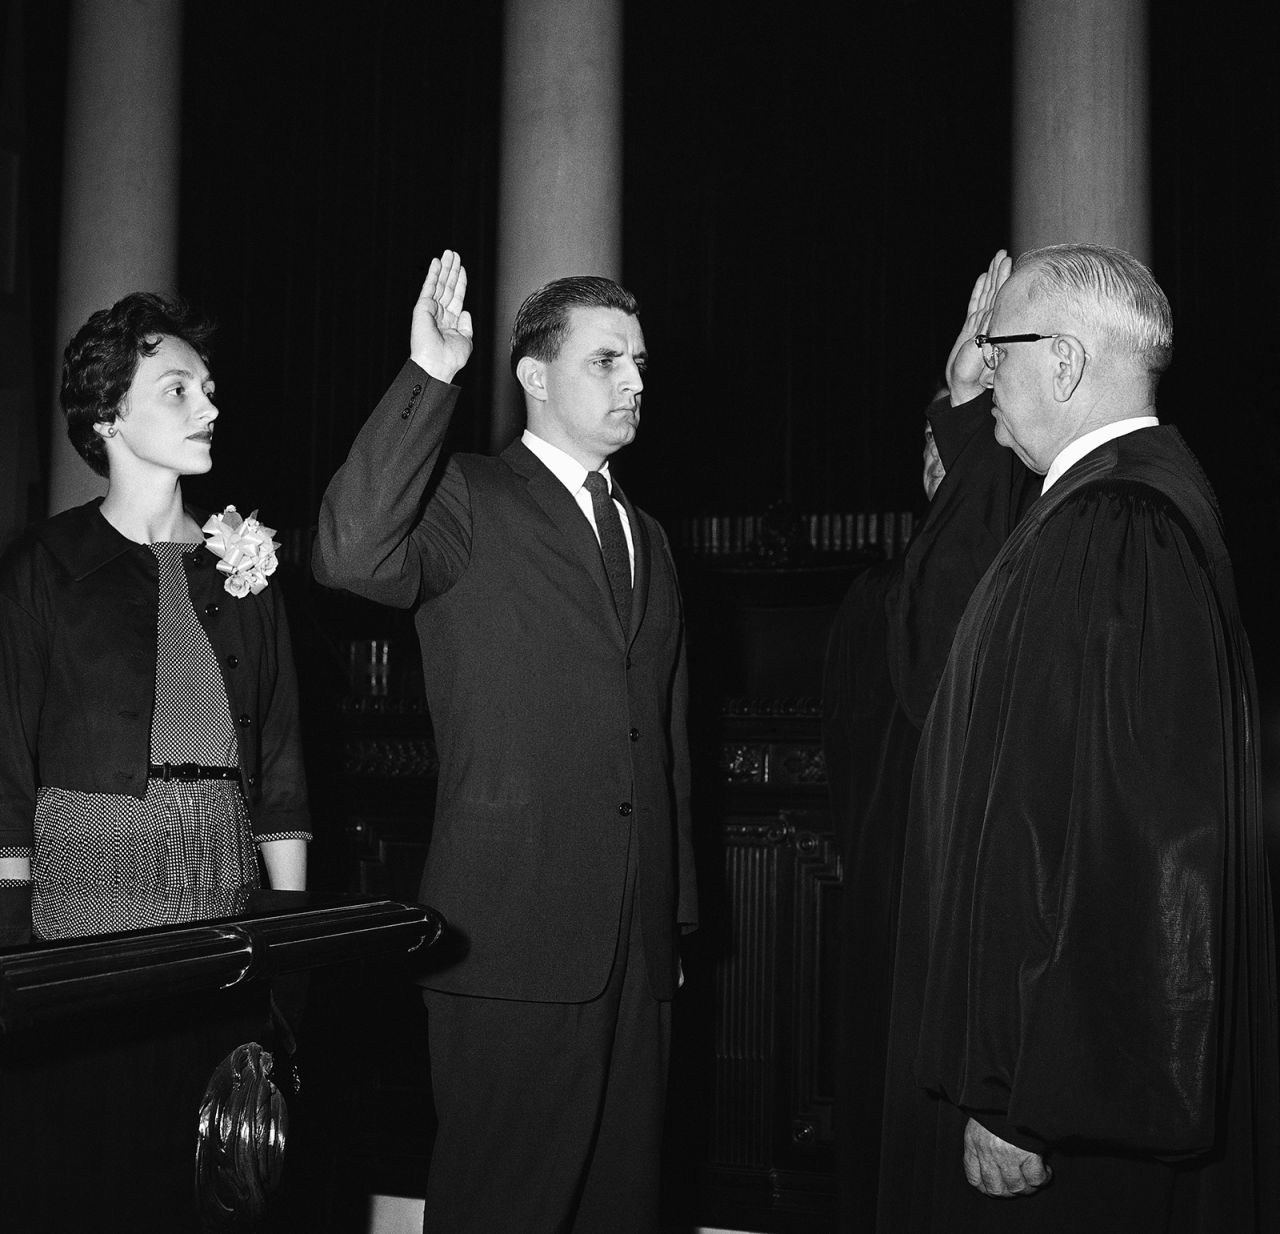 Mondale is sworn in as Minnesota Attorney General by Minnesota Supreme Court Chief Justice Roger Dell, right, on May 5, 1960, in St. Paul, Minnesota.